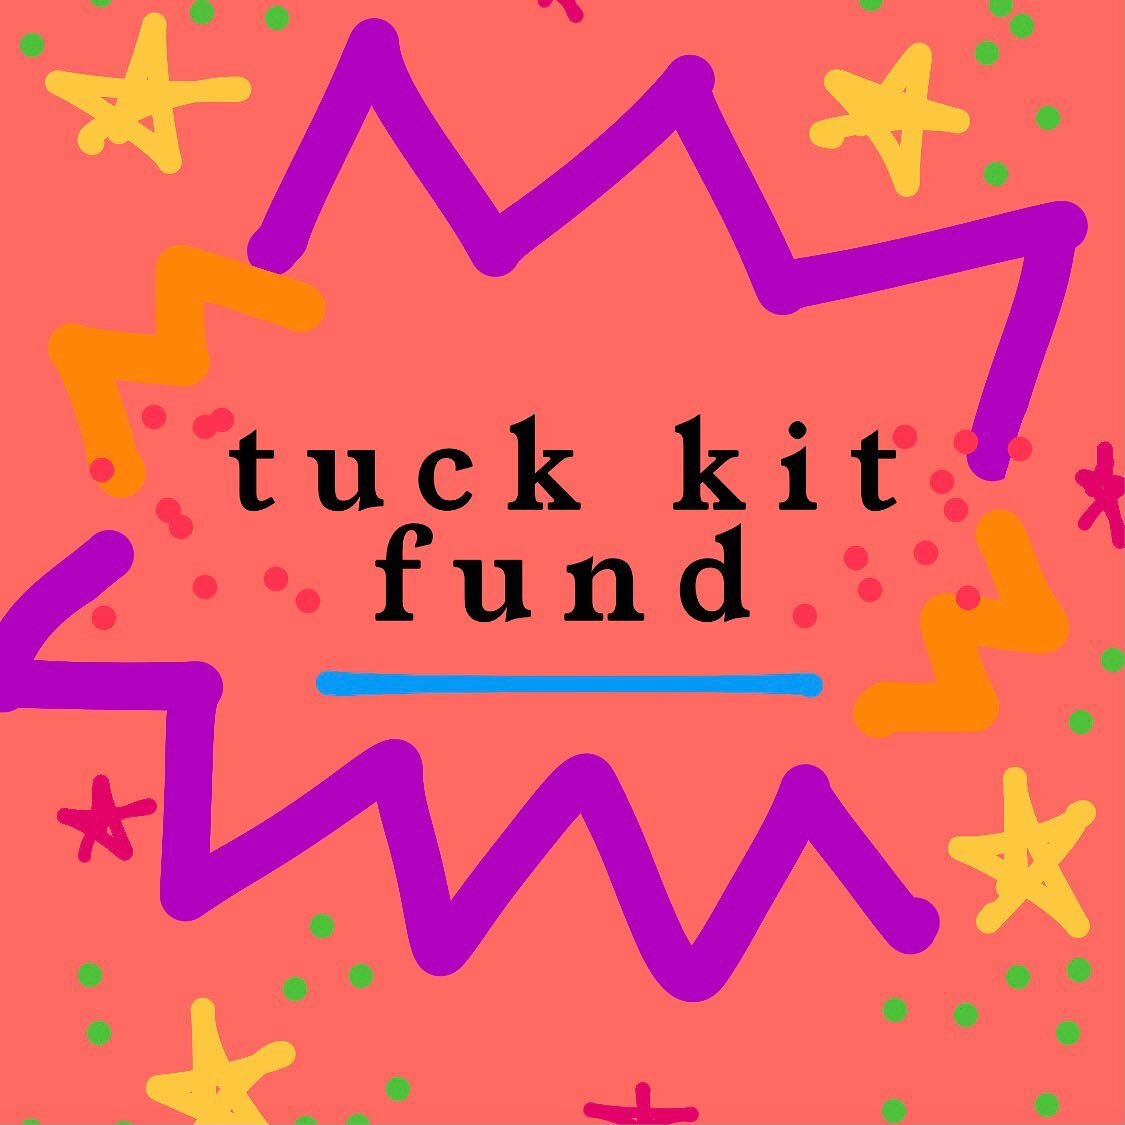 In honor of Pride Month, we&rsquo;re raising $135 to purchase + ship 5 Unclockable Tuck Kits. Tuck kits can be used to create a flat appearance between one&rsquo;s legs. We&rsquo;ll be purchasing Unclockable&rsquo;s swim- and gym-proof 7-tuck kits fo